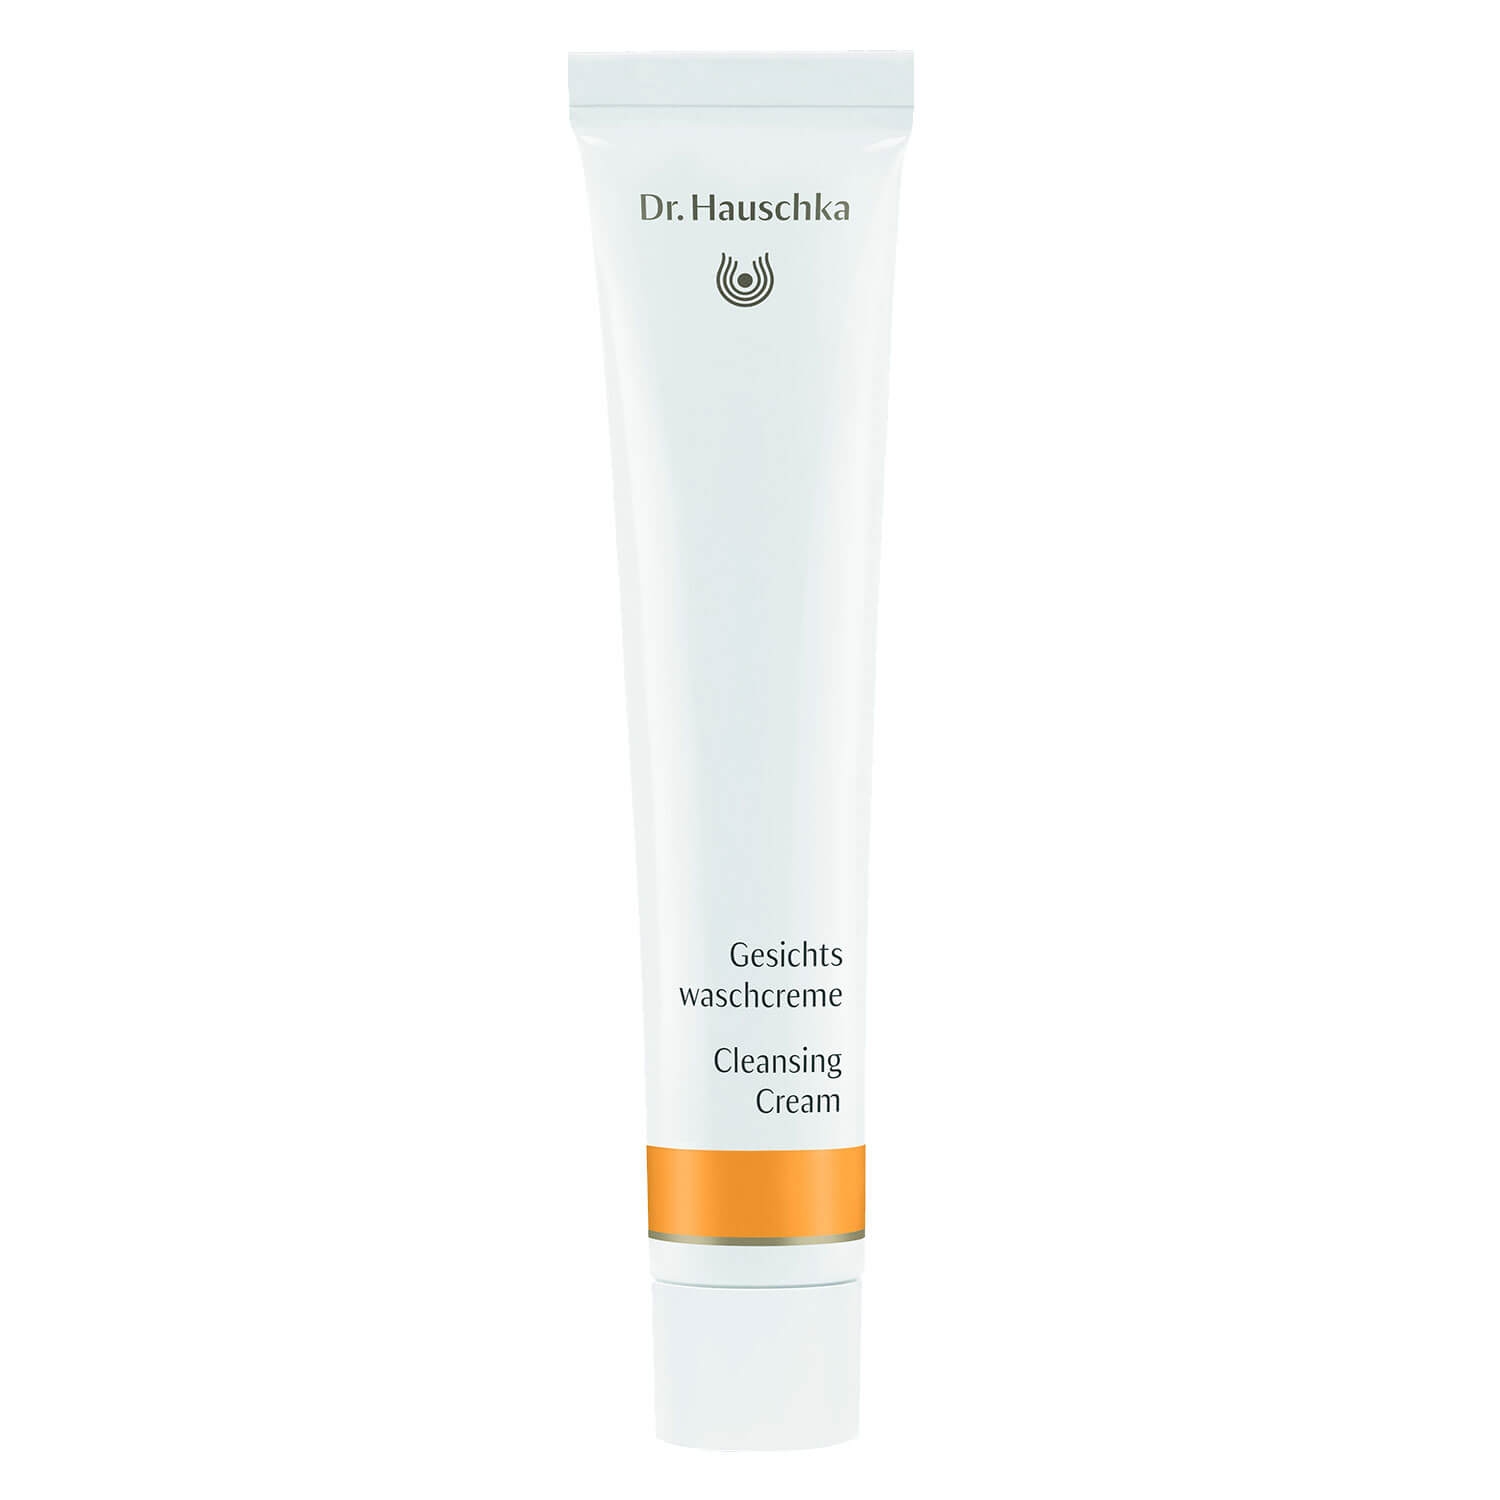 Product image from Dr. Hauschka - Gesichtswaschcreme